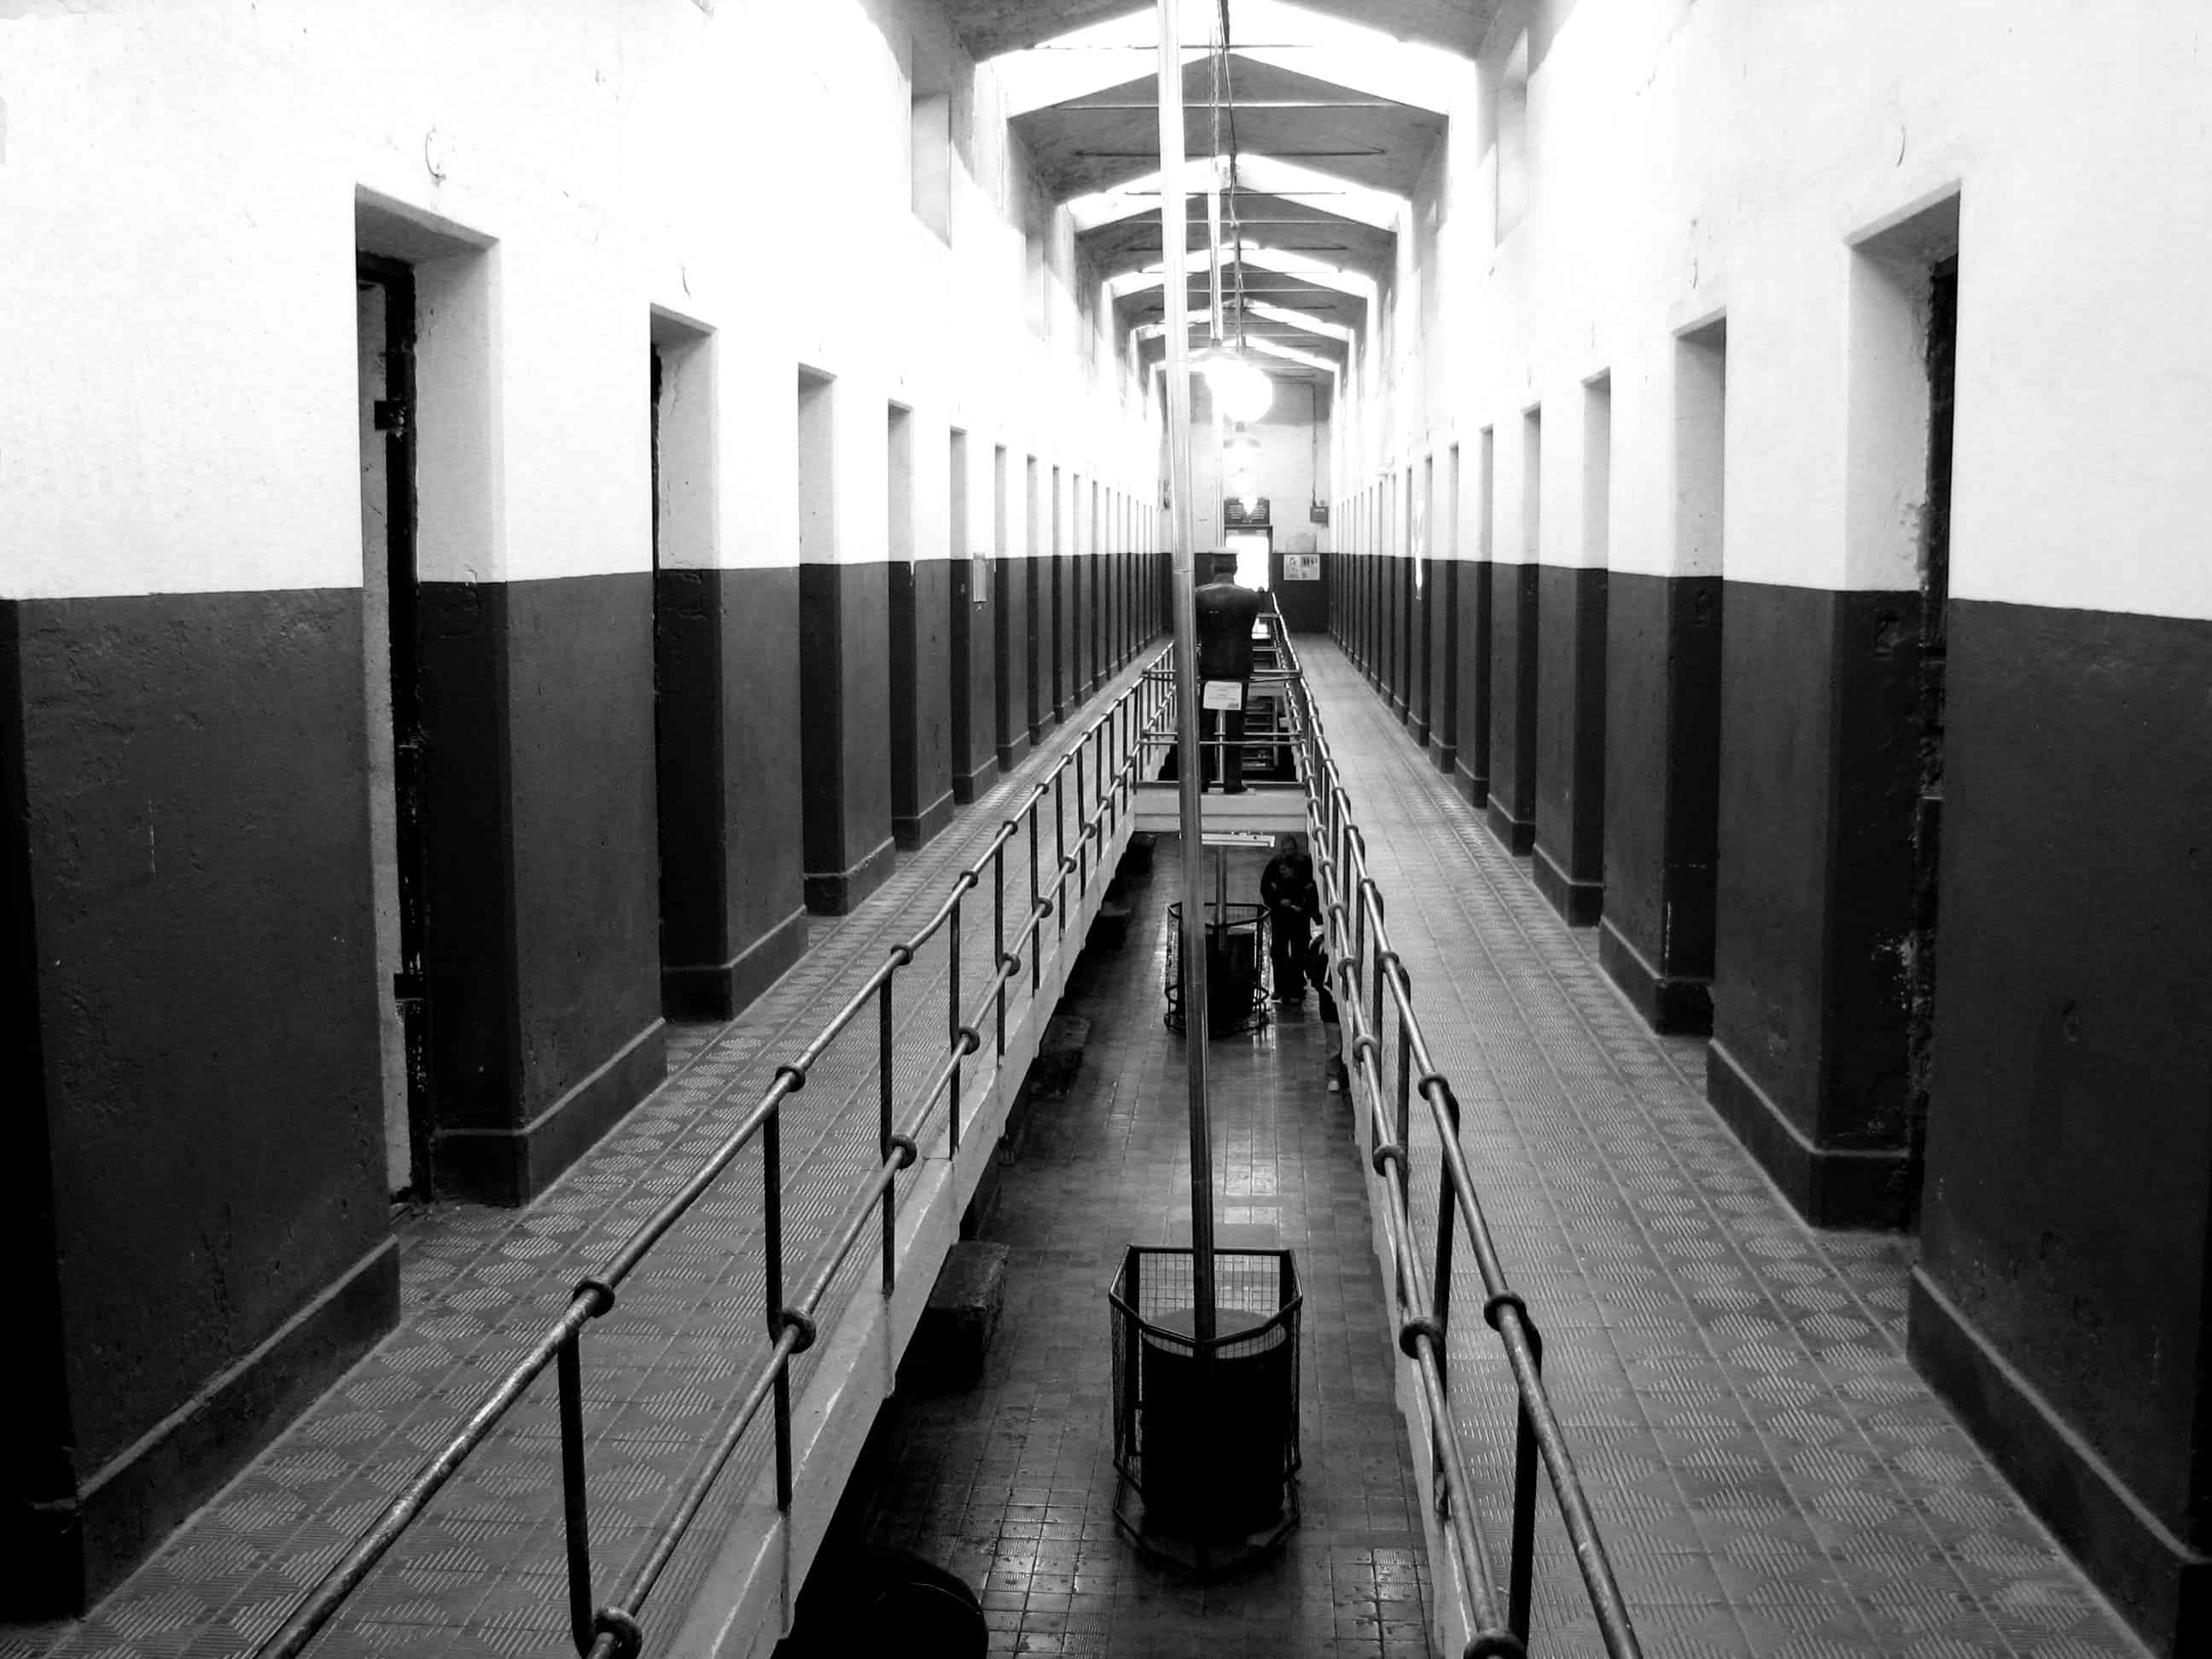 A corridor of the end of the world prison at Ushuaia, now a museum. Image credits: Luis Argerich